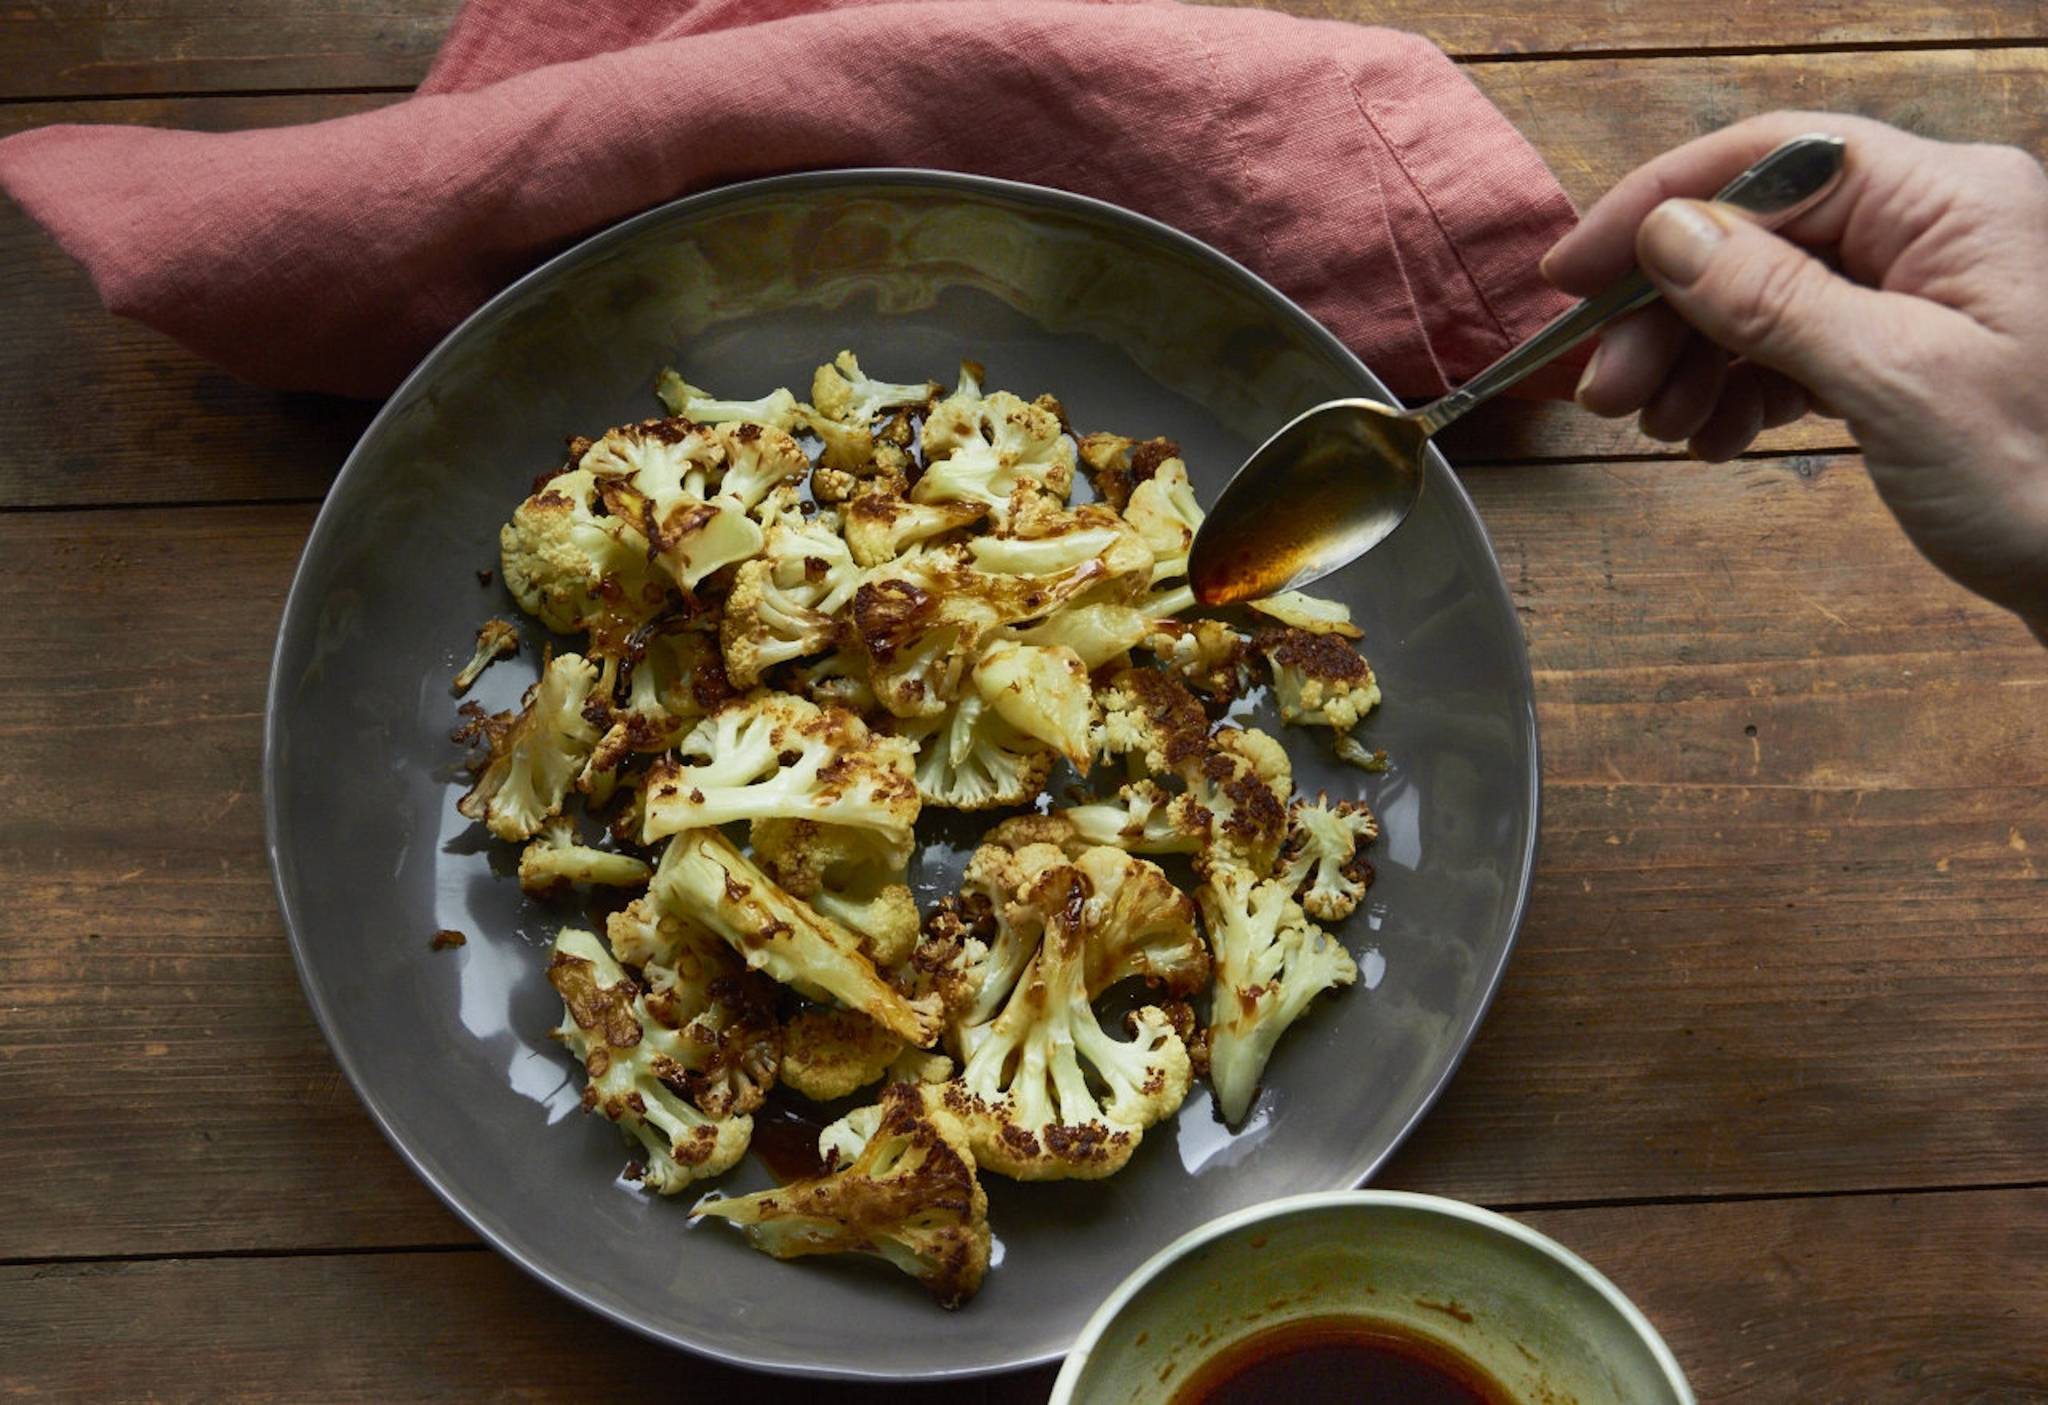 This Jan. 27 photo shows roasted cauliflower with a sesame drizzle in New York. This dish is from a recipe by Katie Workman. (Mia via AP)